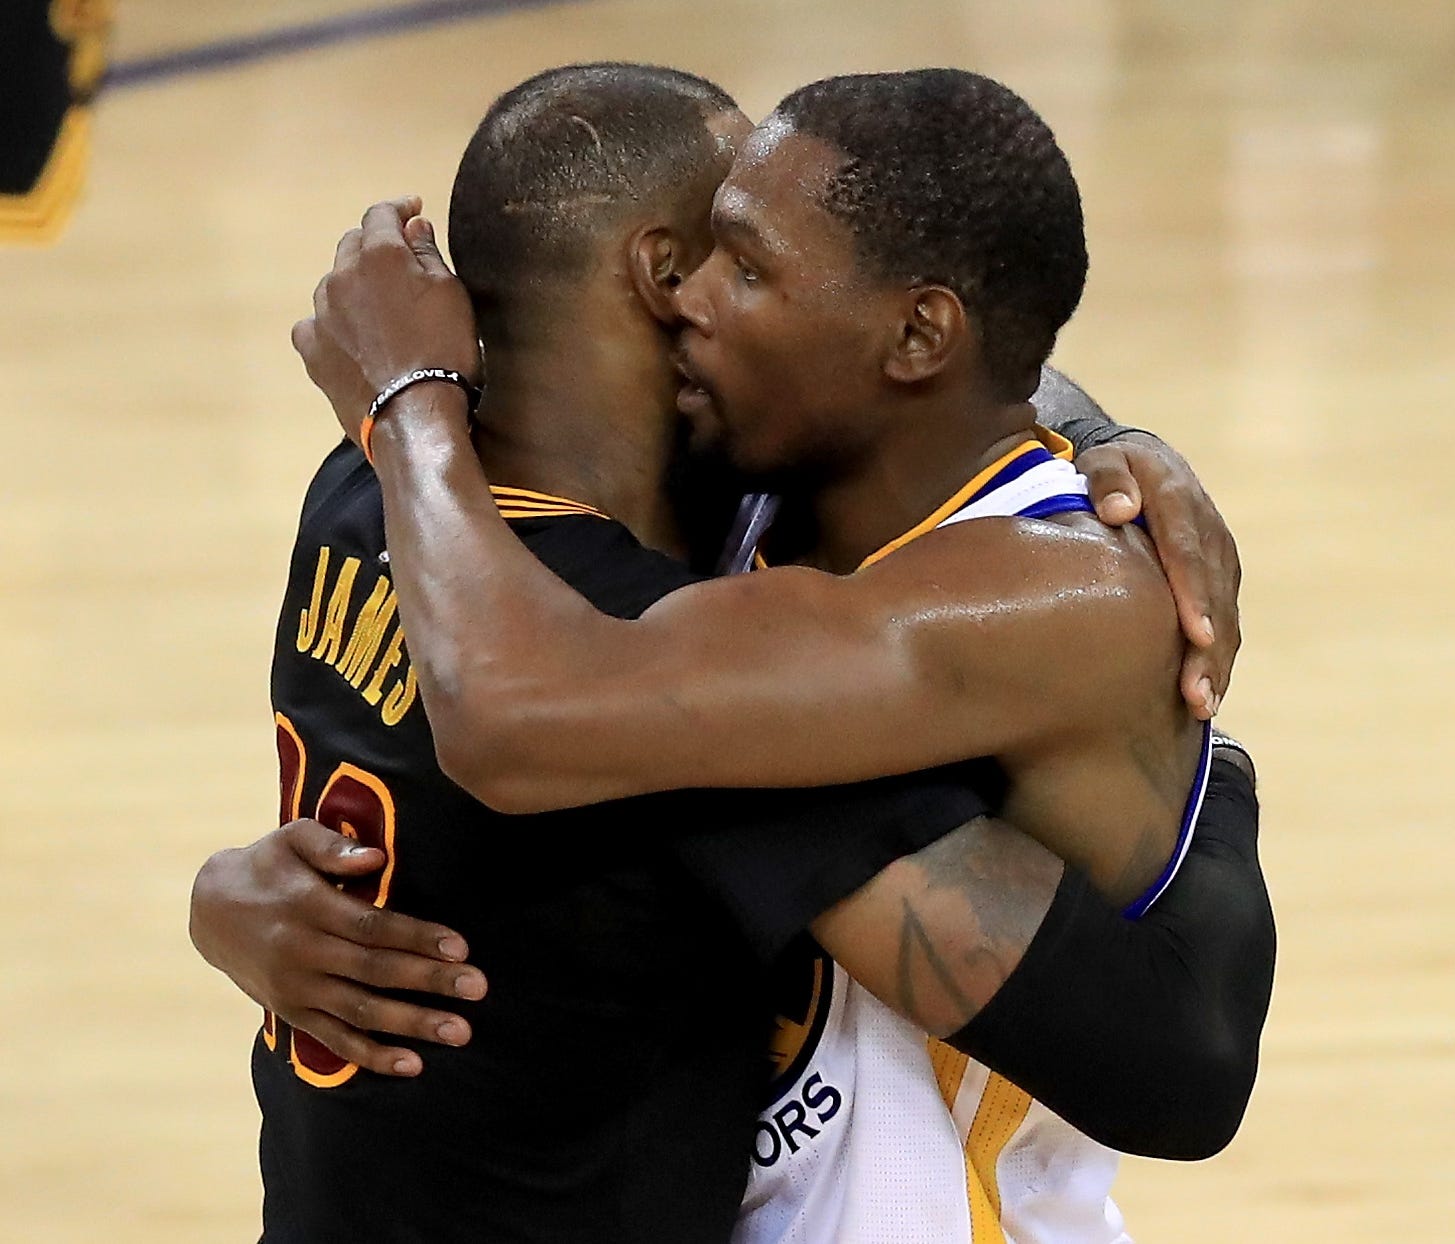 Kevin Durant hugs LeBron James after defeating the Cleveland Cavaliers 129-120 in Game 5 to win the 2017 NBA Finals.